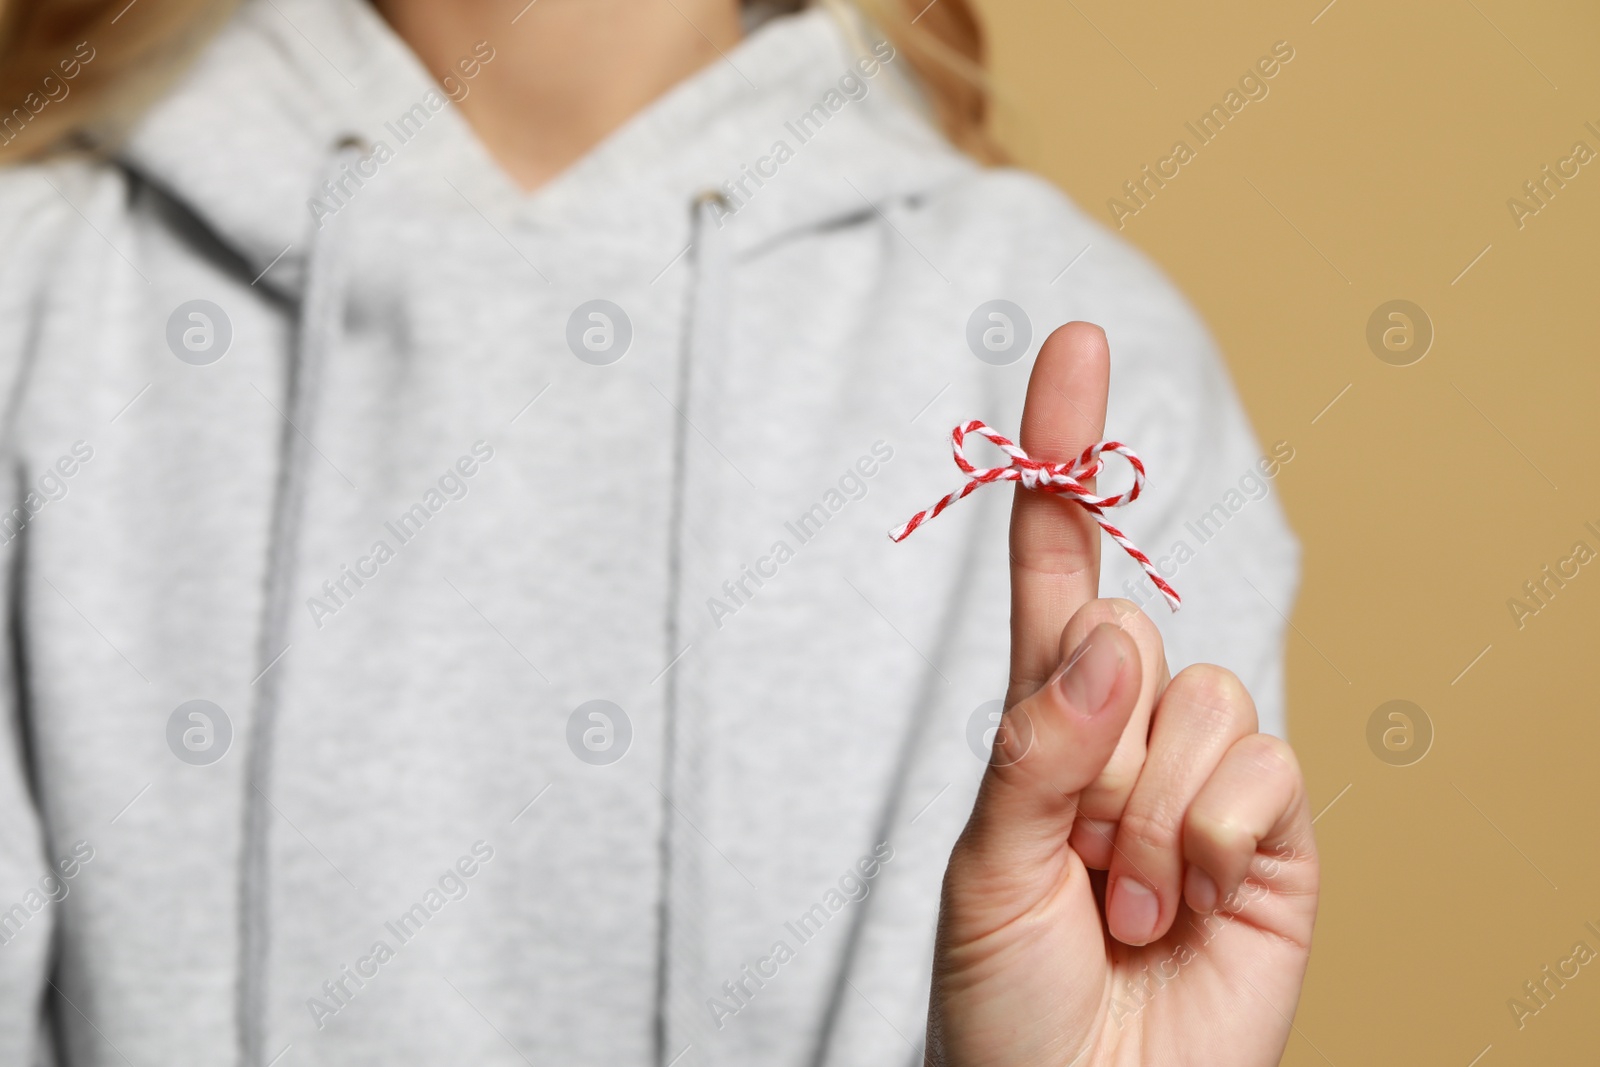 Photo of Woman showing index finger with tied bow as reminder against light brown background, focus on hand